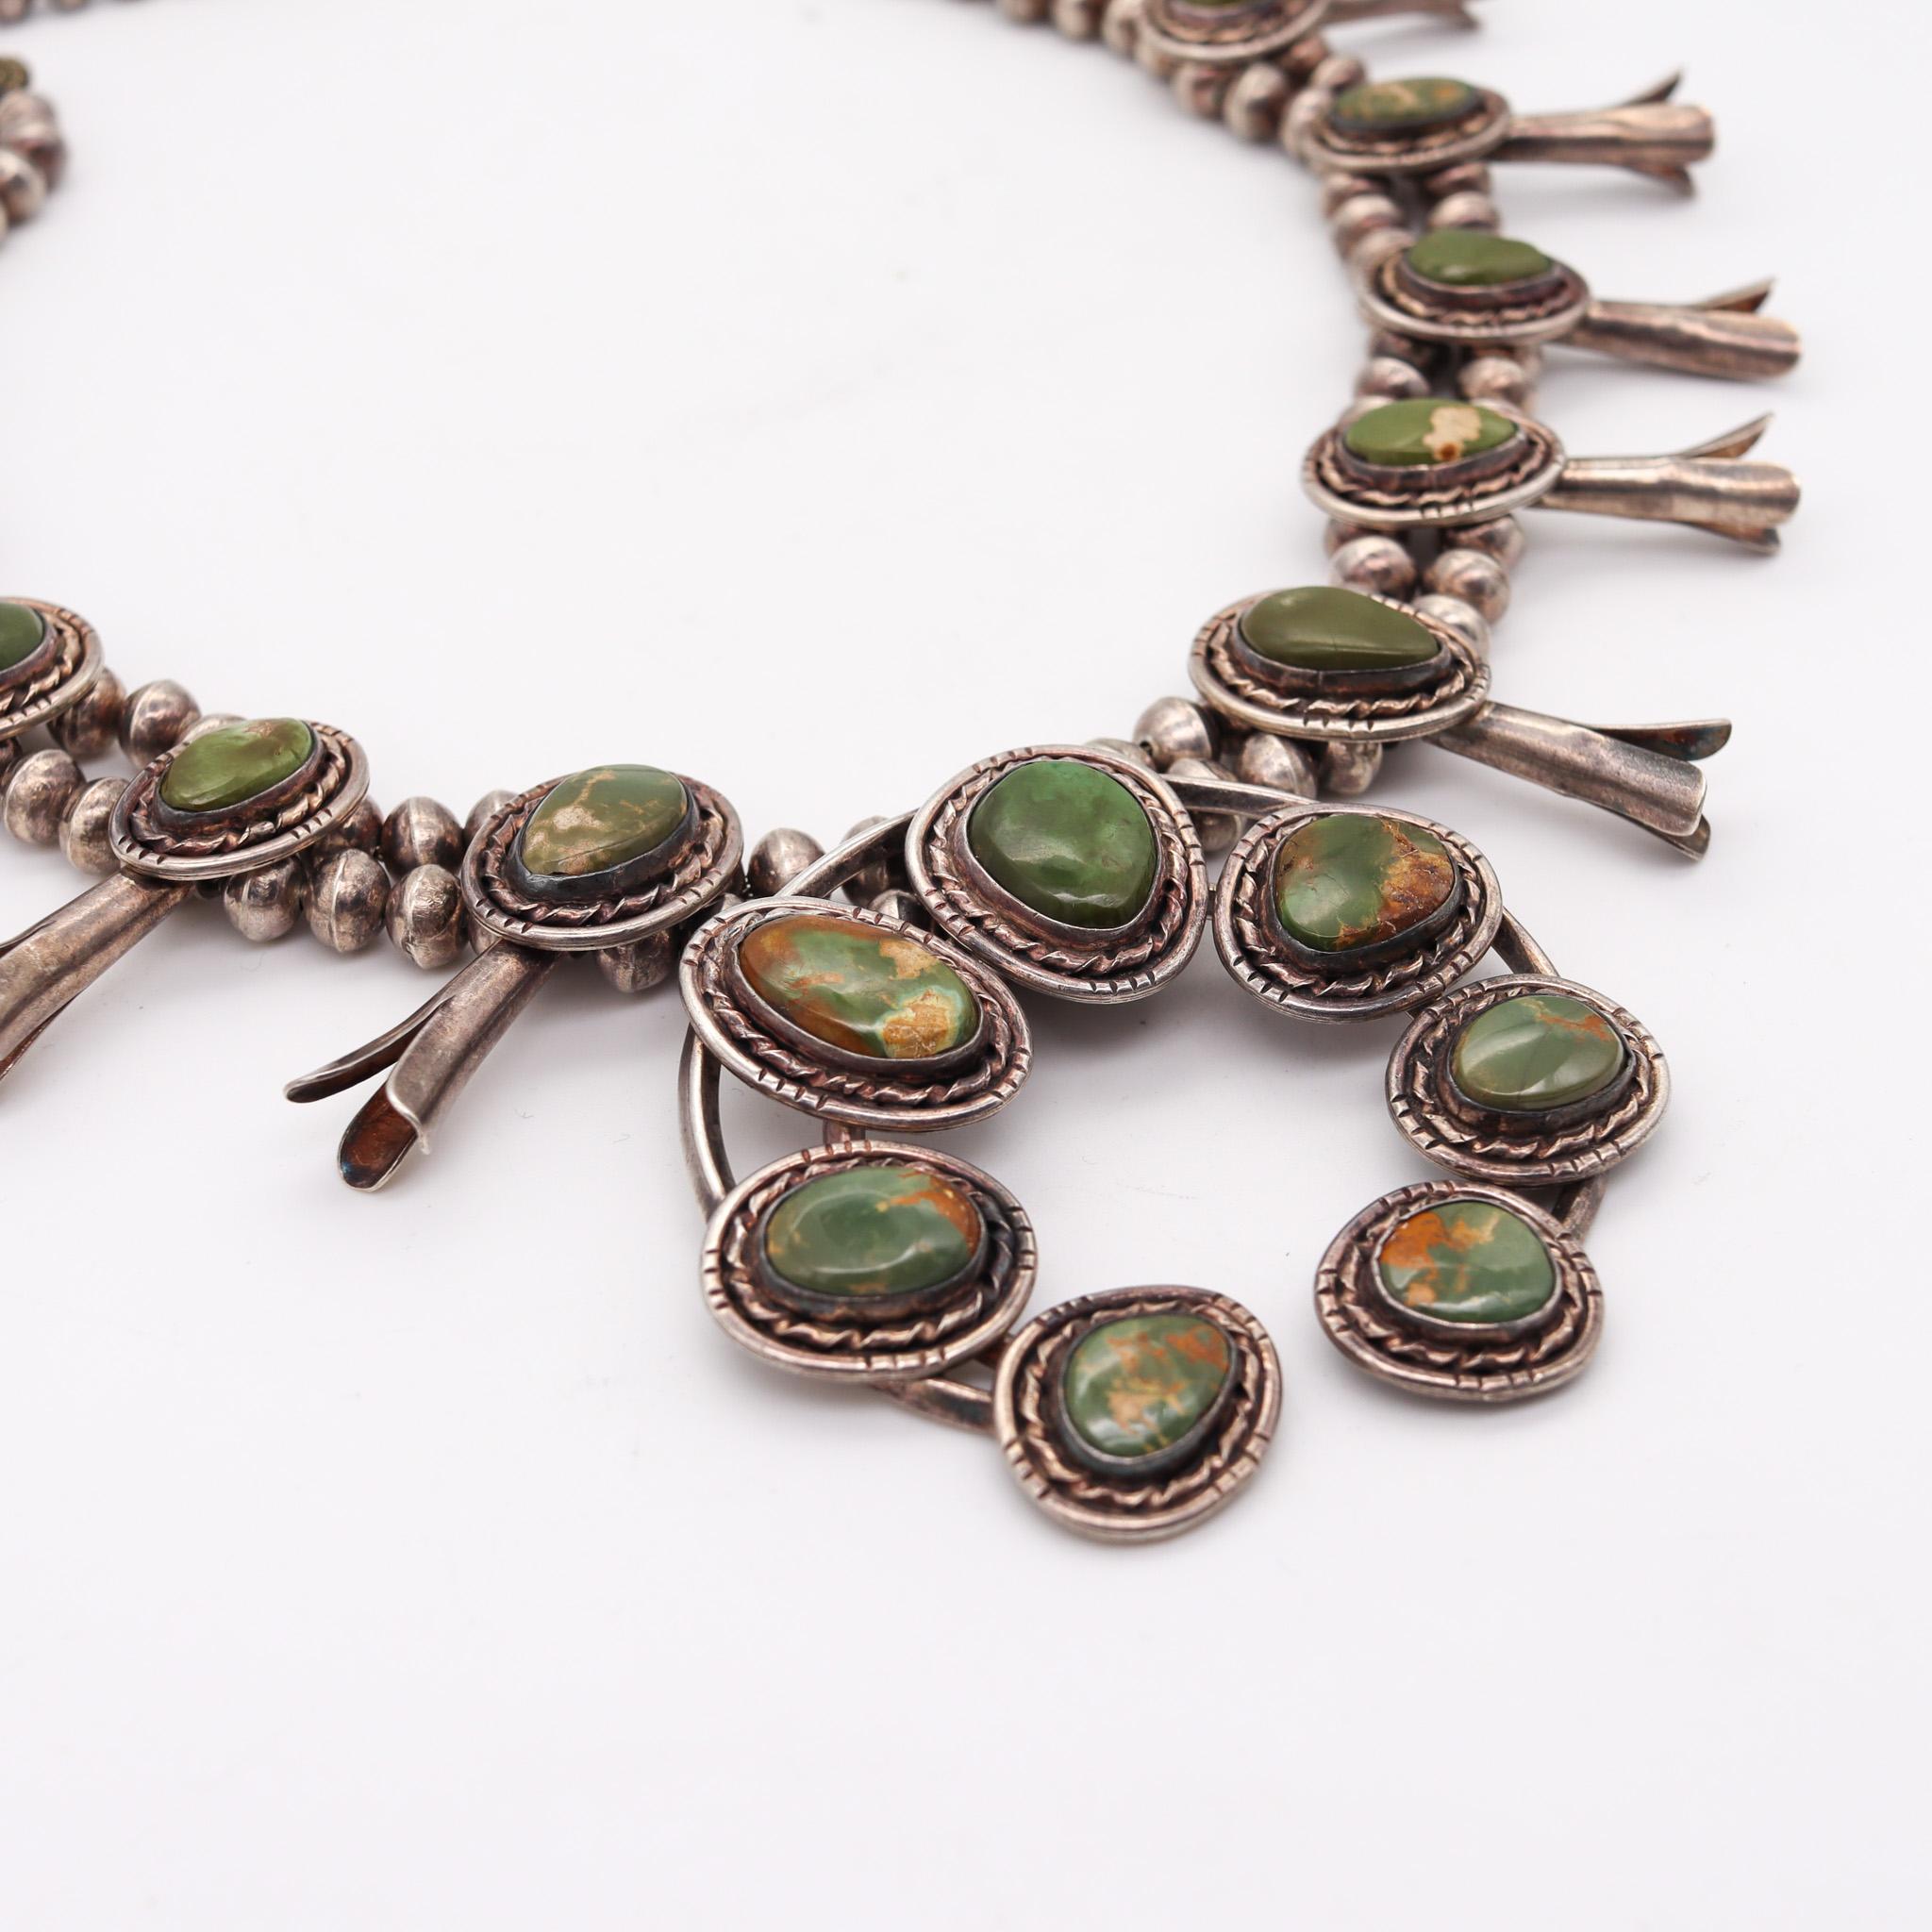 Exceptional Native American Navajo necklace.

A beautiful vintage tribal piece, created in Arizona by the Navajo native Americans back in the 1950. This squash blossom necklace was entirely crafted in solid .935/.999 sterling silver and fitted with